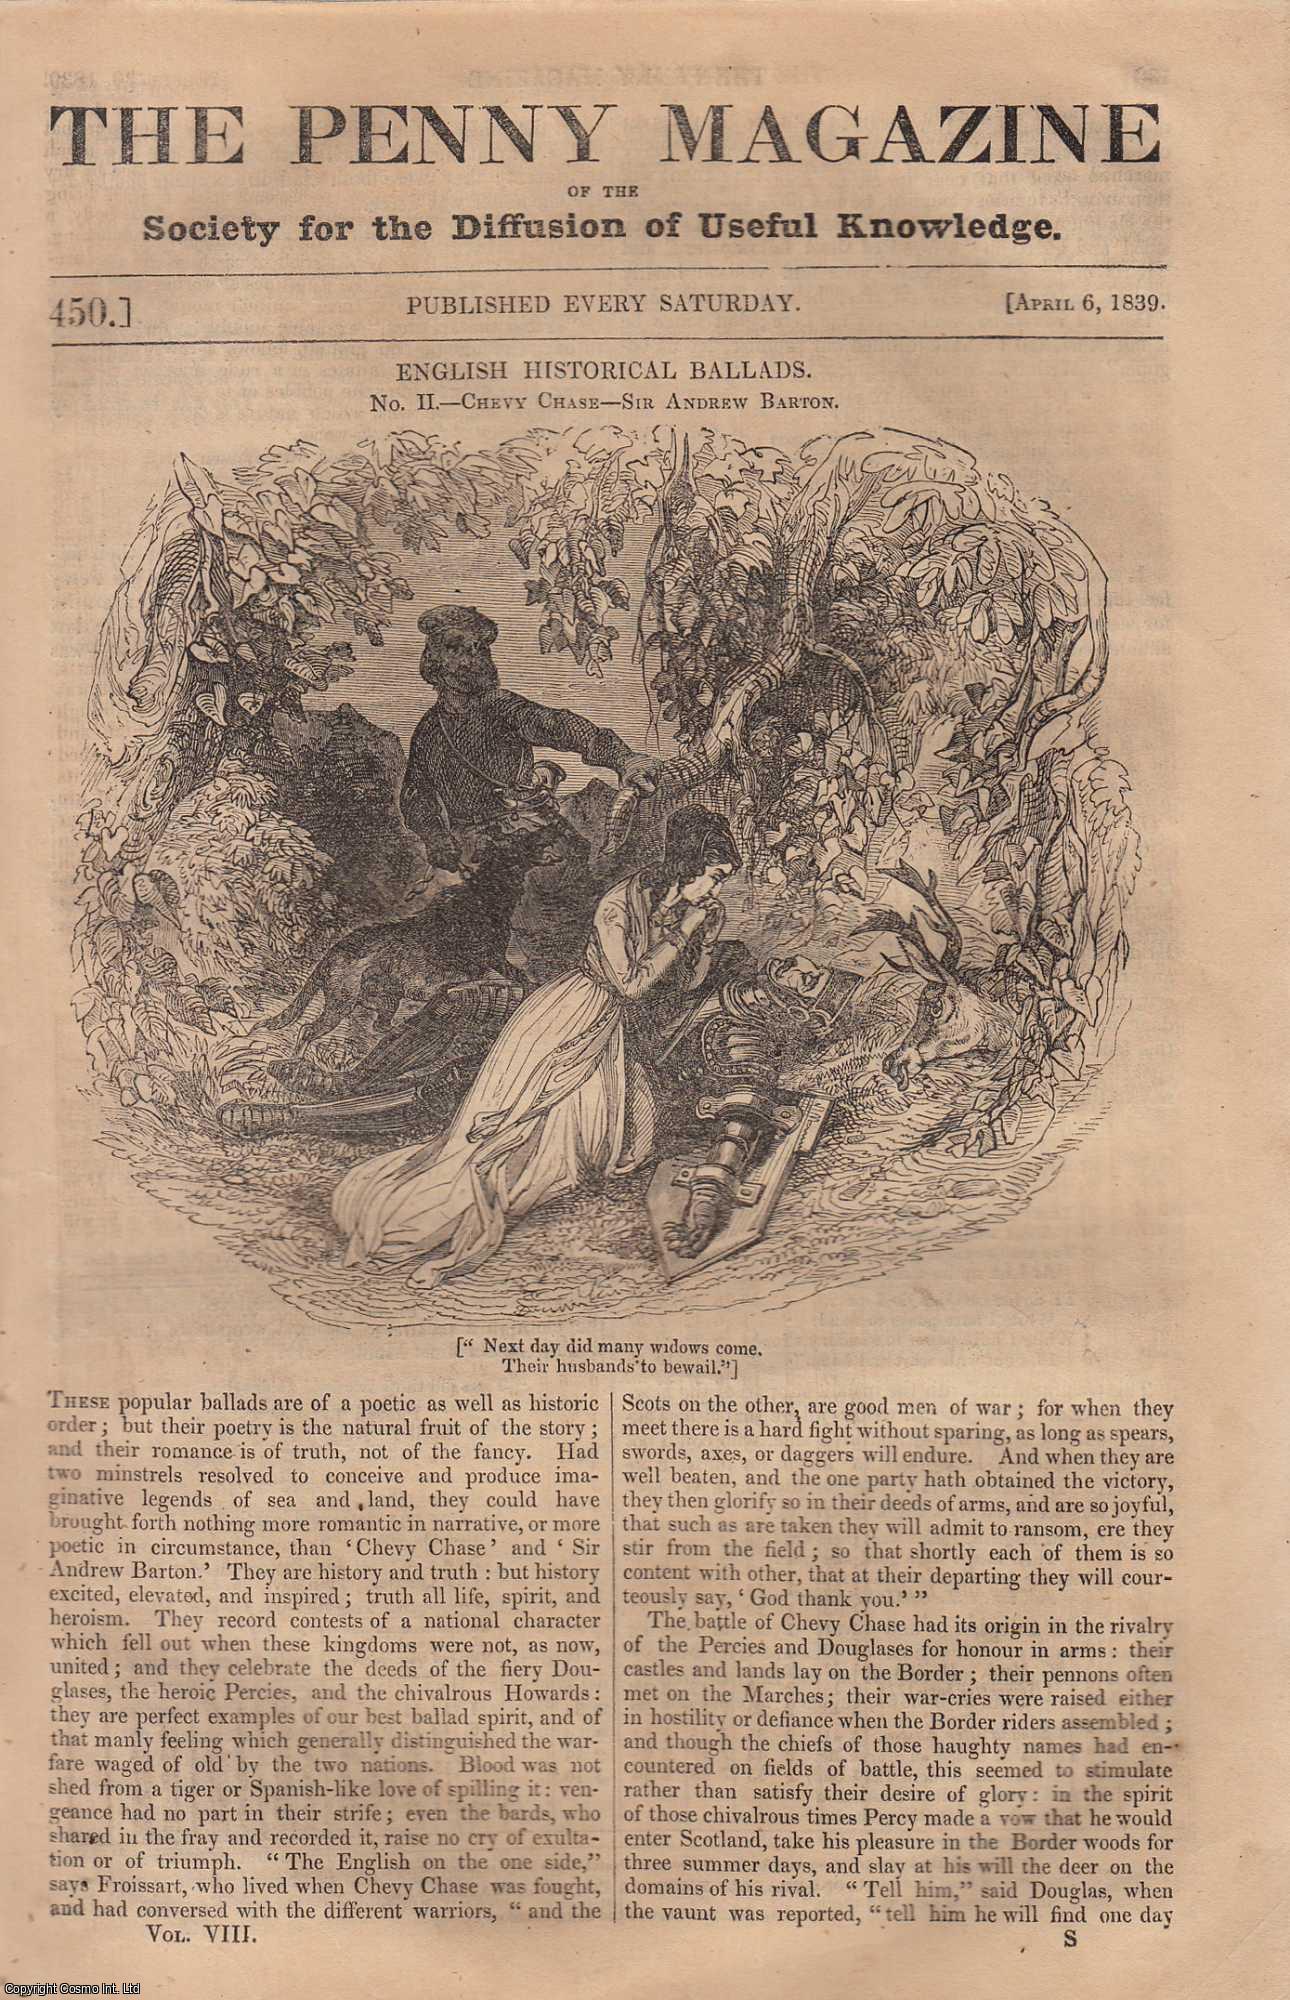 ---. - Chevy Chase, Sir Andrew Barton (part 1); The Derby Football Play; The Portrait of Alexander (part 1) (Great Third King of Macedonia), etc. Issue No. 450, 1839. A complete rare weekly issue of the Penny Magazine, 1839.